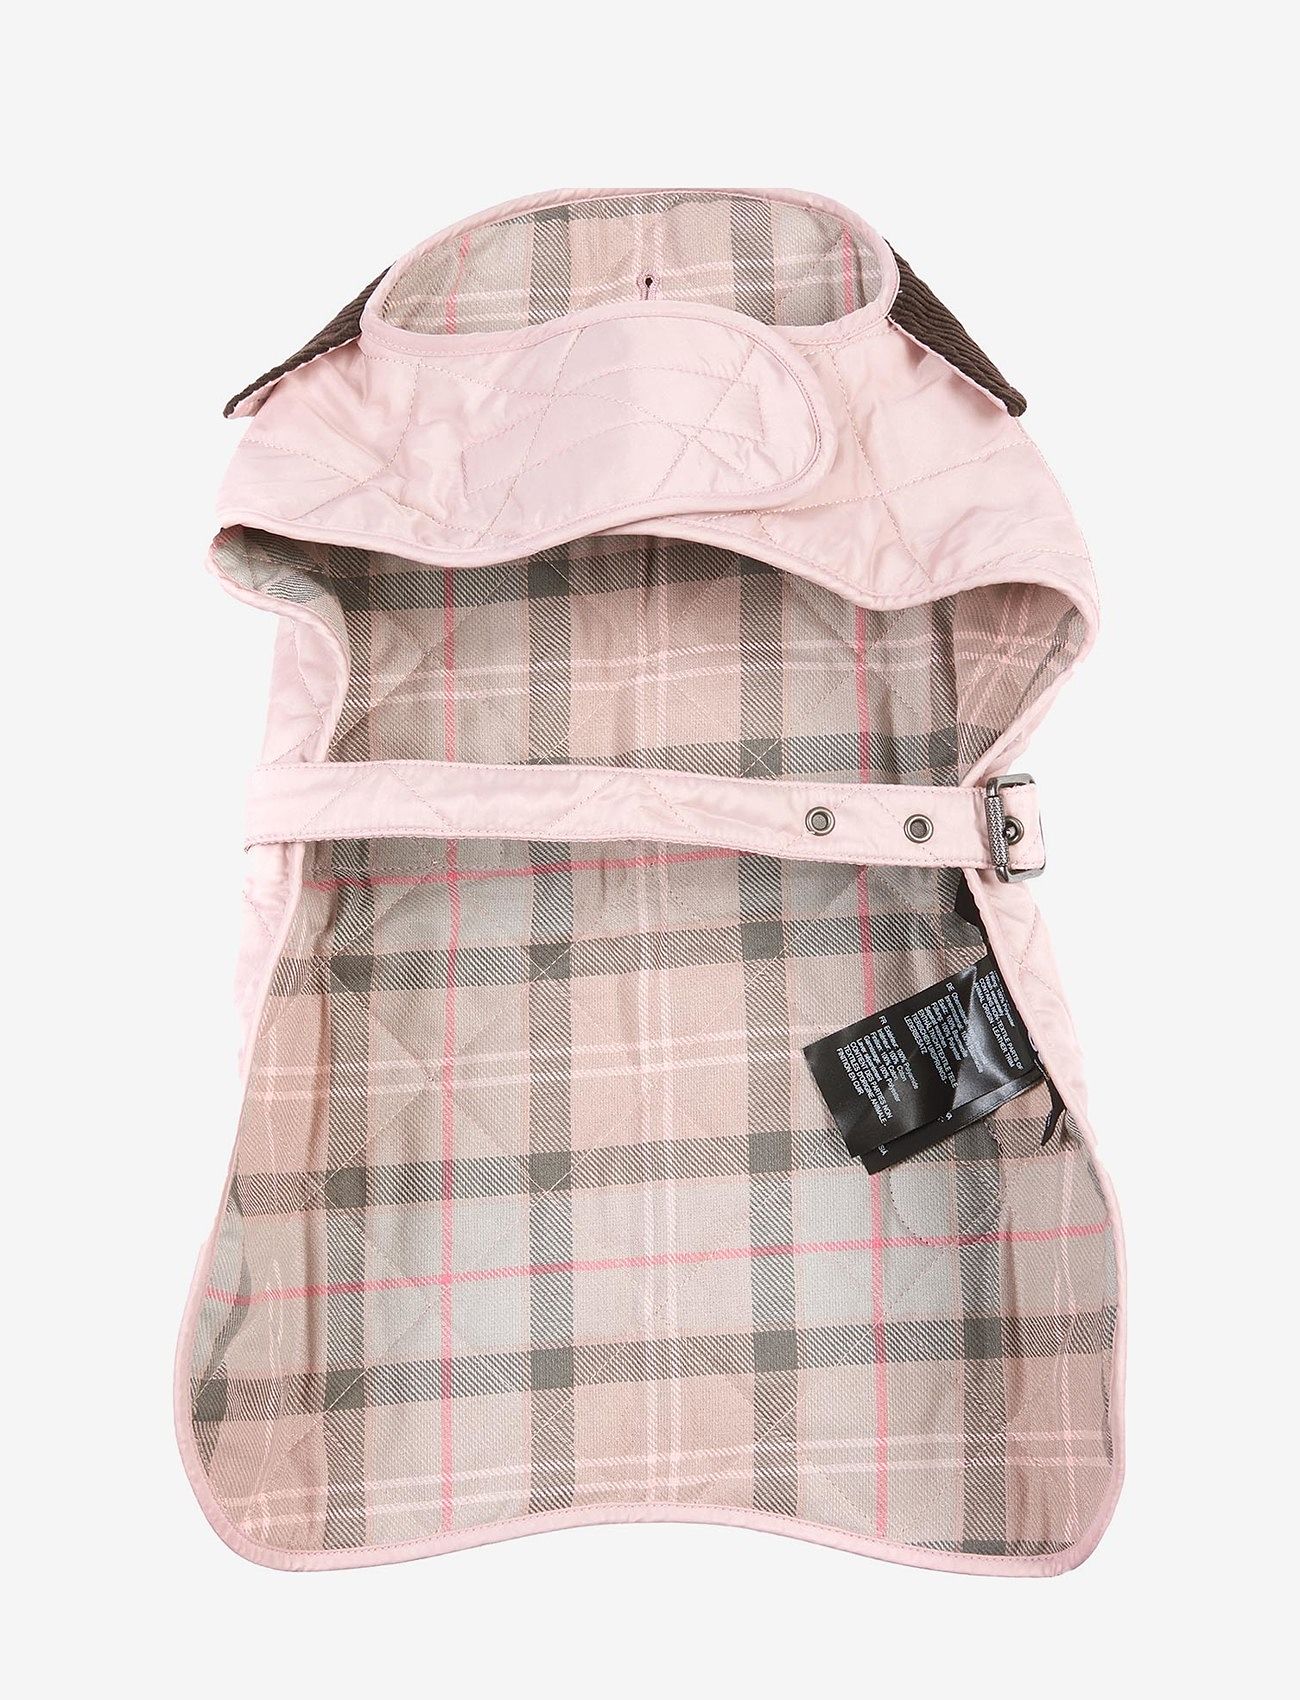 Barbour - Barbour Quilted Dog Coat - hundebekleidung - pink - 1